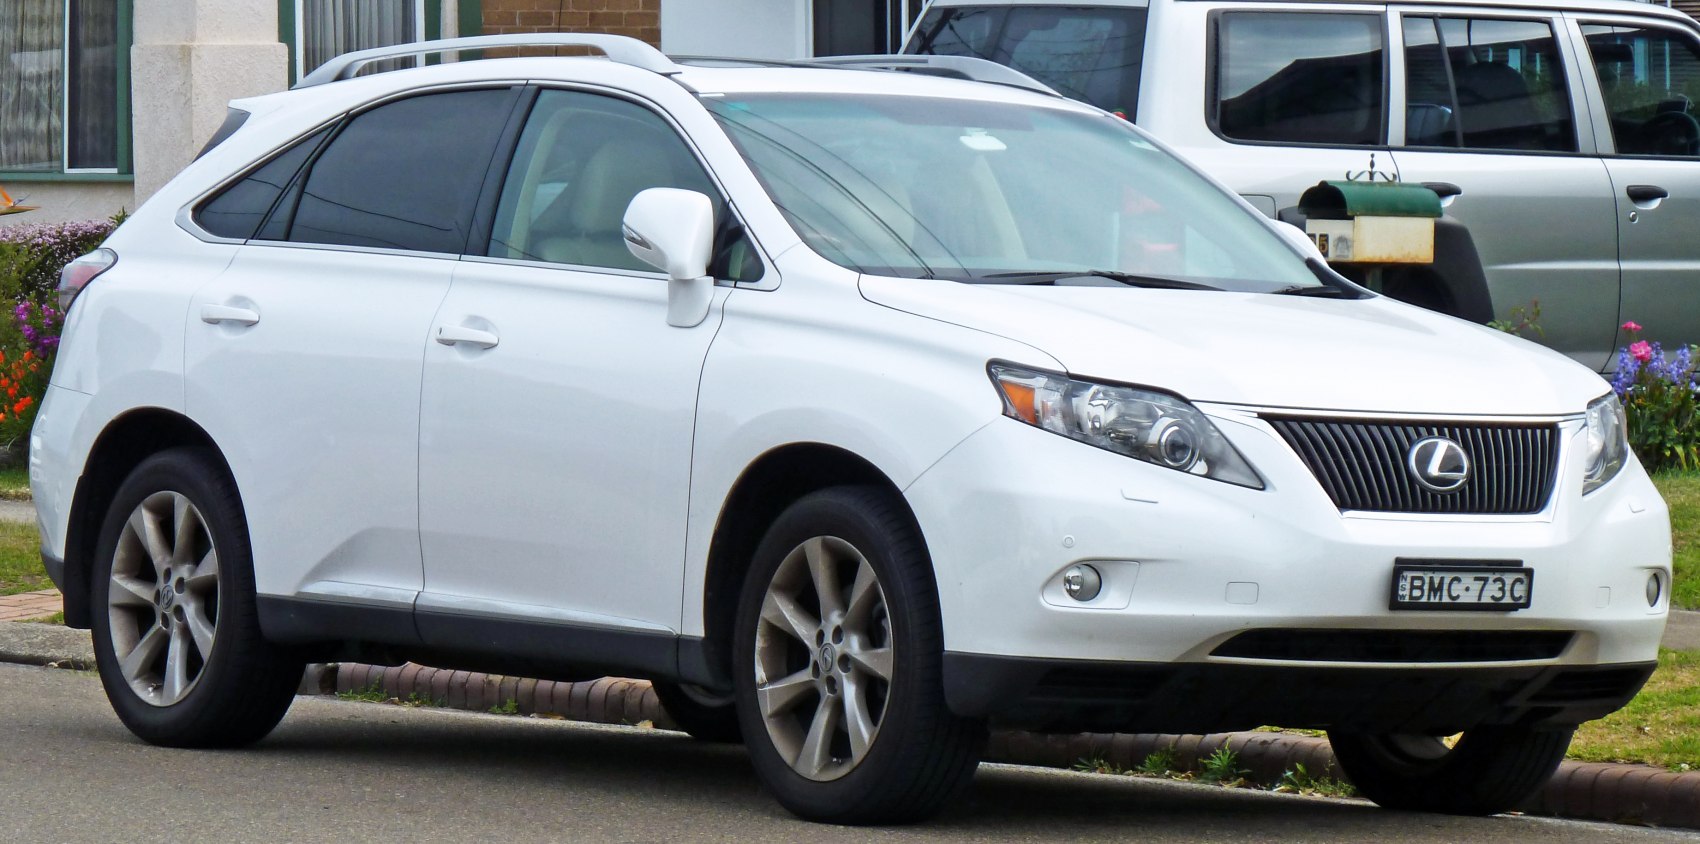 https://totalrenting.es/wp-content/uploads/2022/10/lexus-rx-iii-2010-350-4wd-277-cv-suv.png